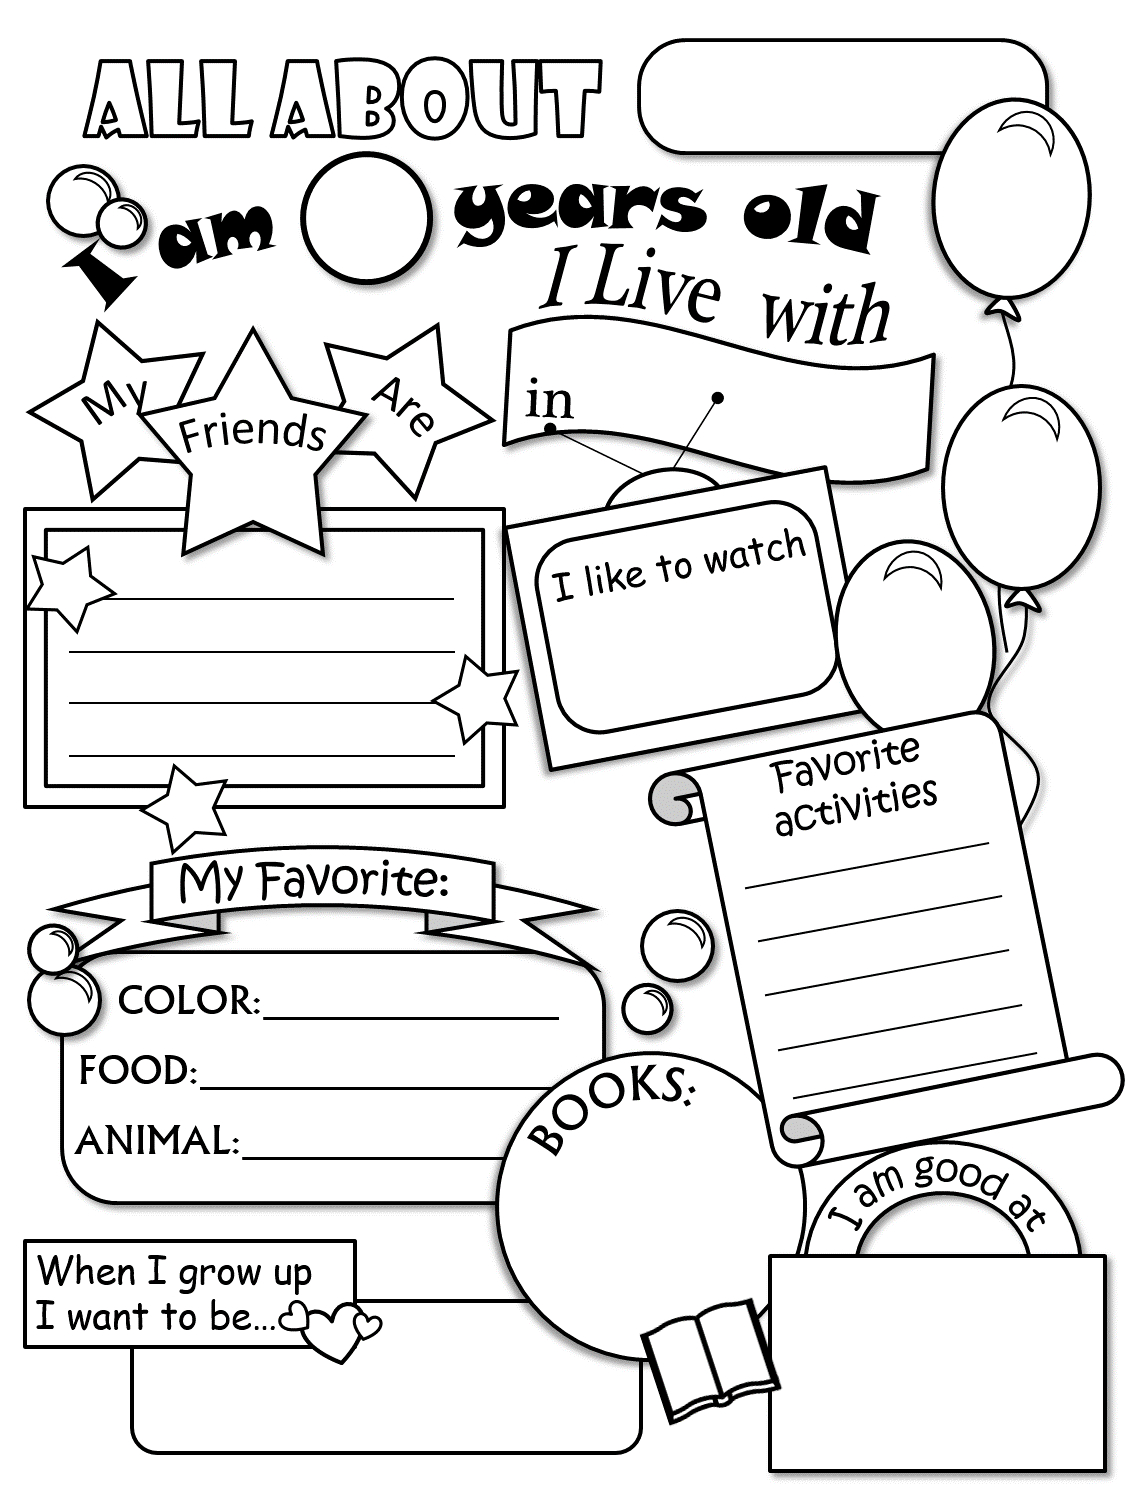 All About Me Worksheet - All About Me Free Printable